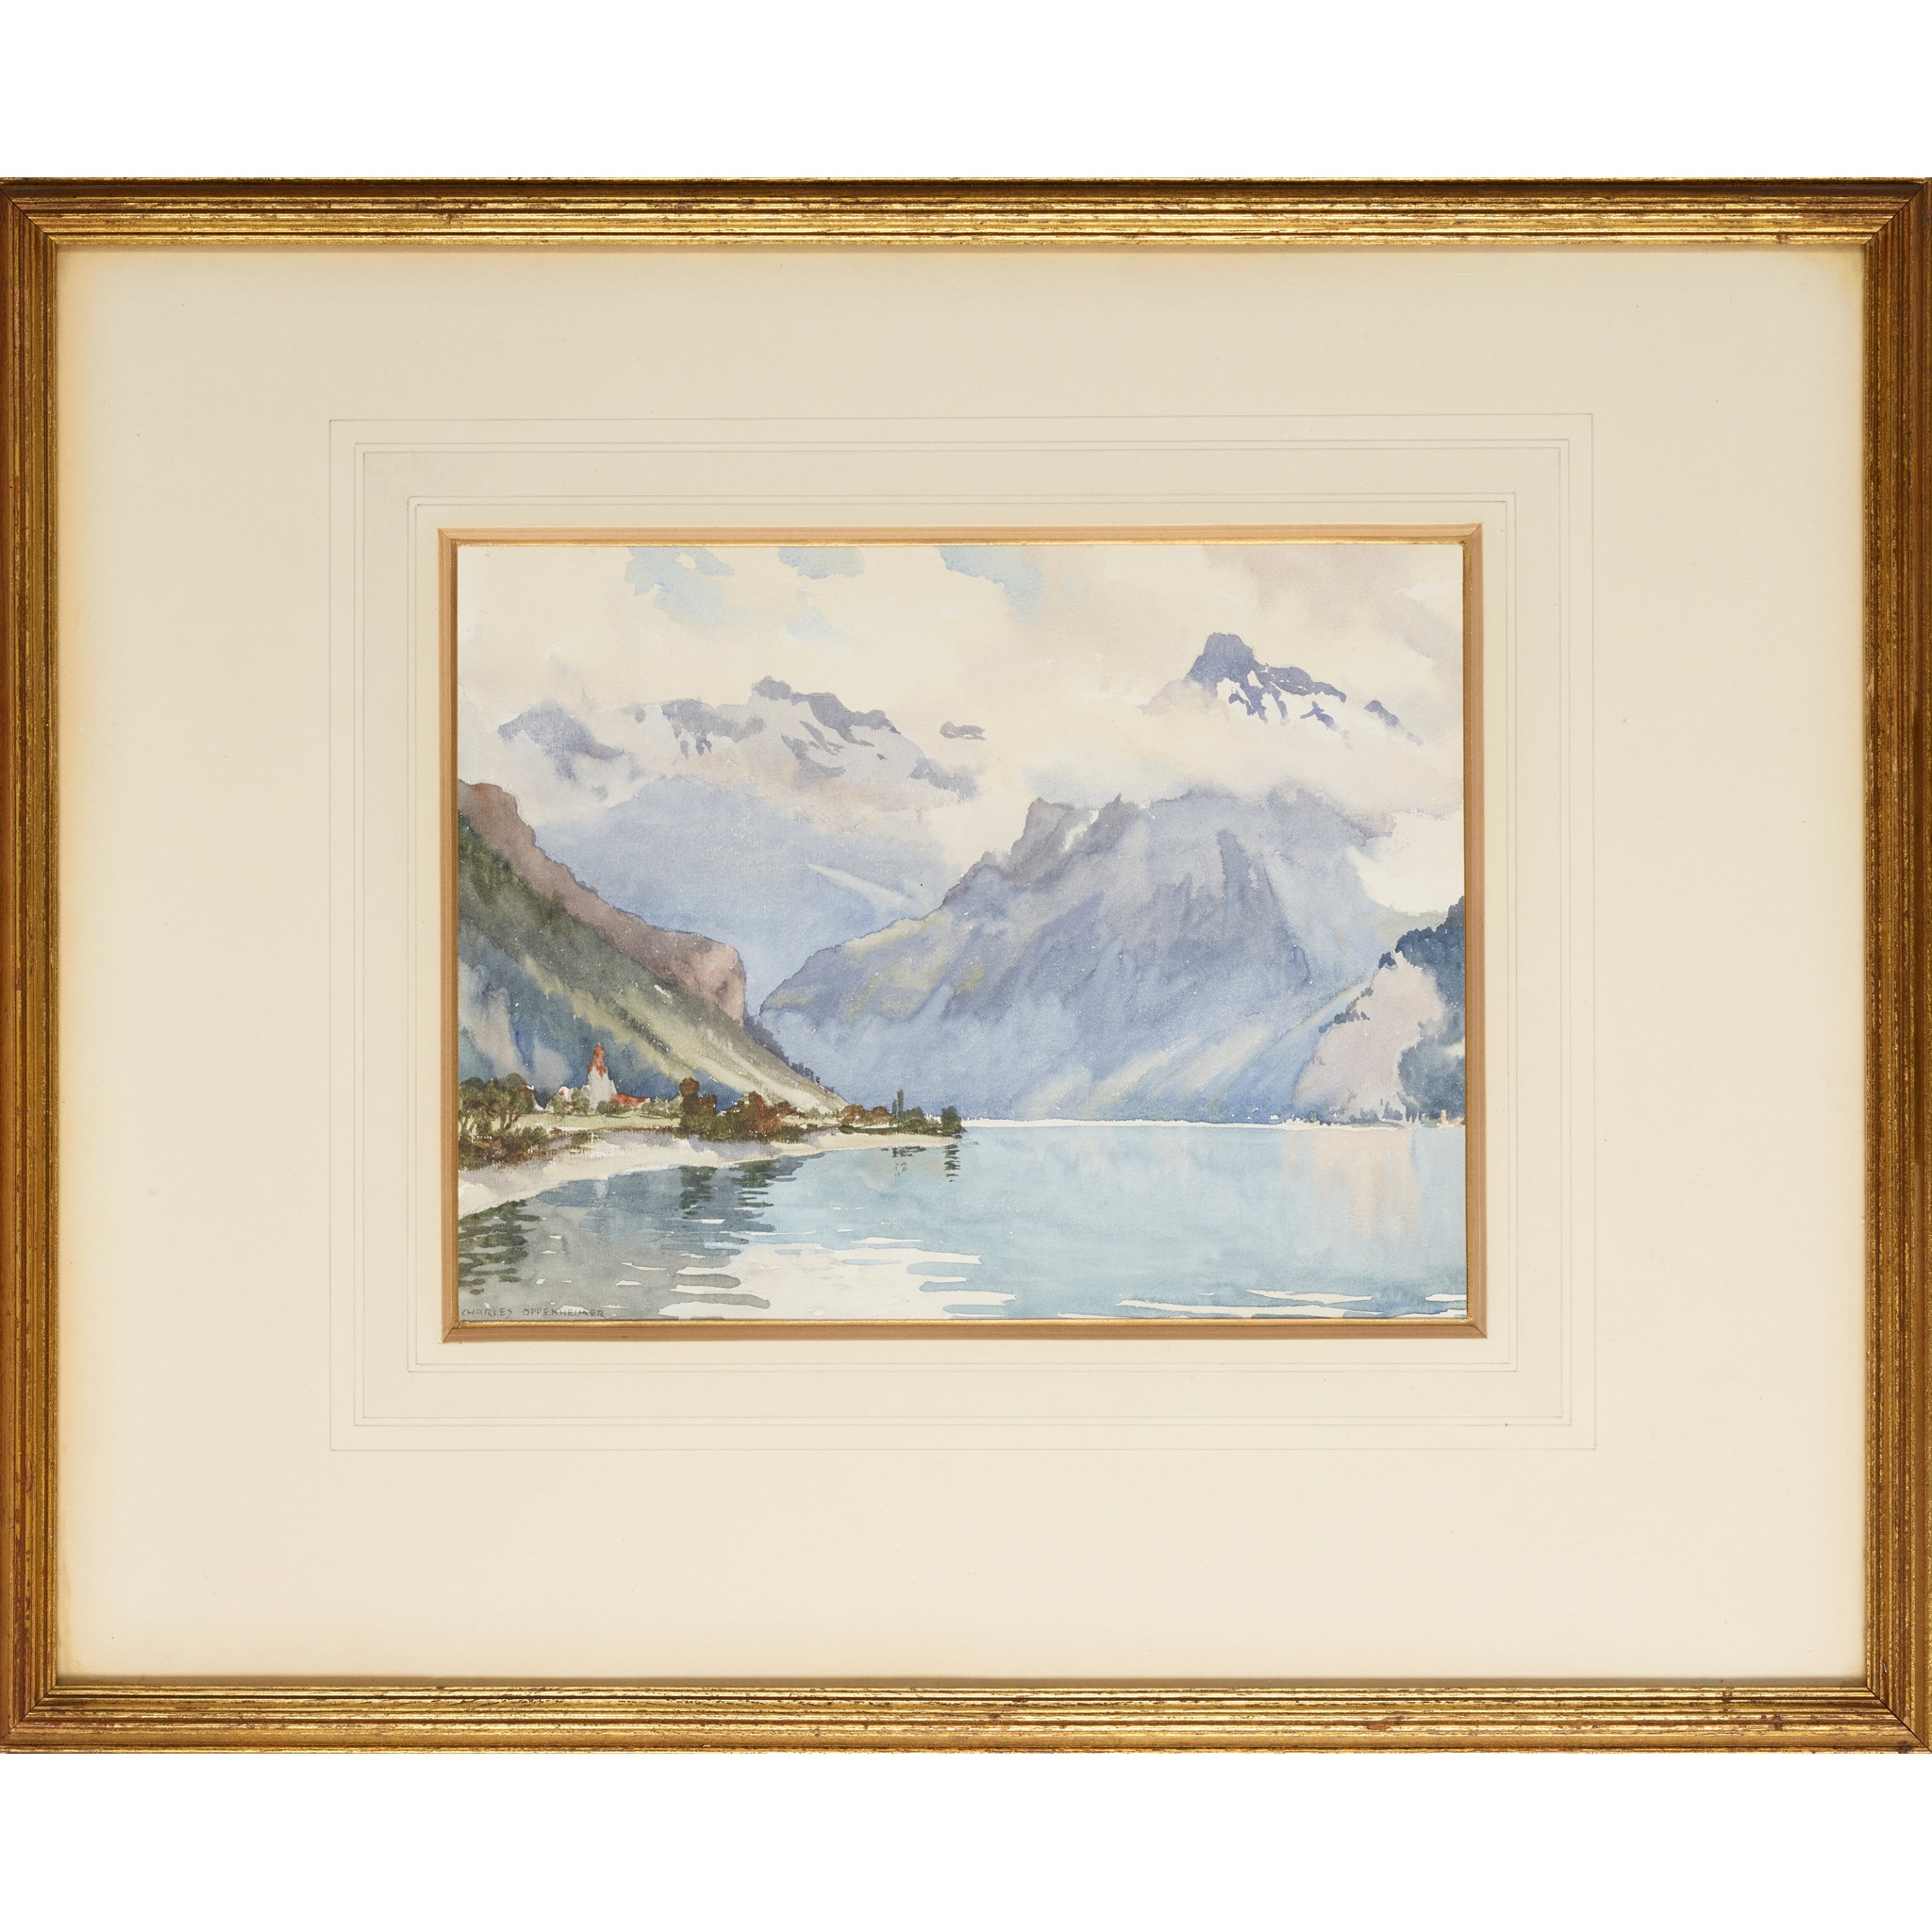 § CHARLES OPPENHEIMER R.S.A., R.S.W. (BRITISH 1876-1961) THE HEAD OF LAKE LUCERNE - Image 2 of 3